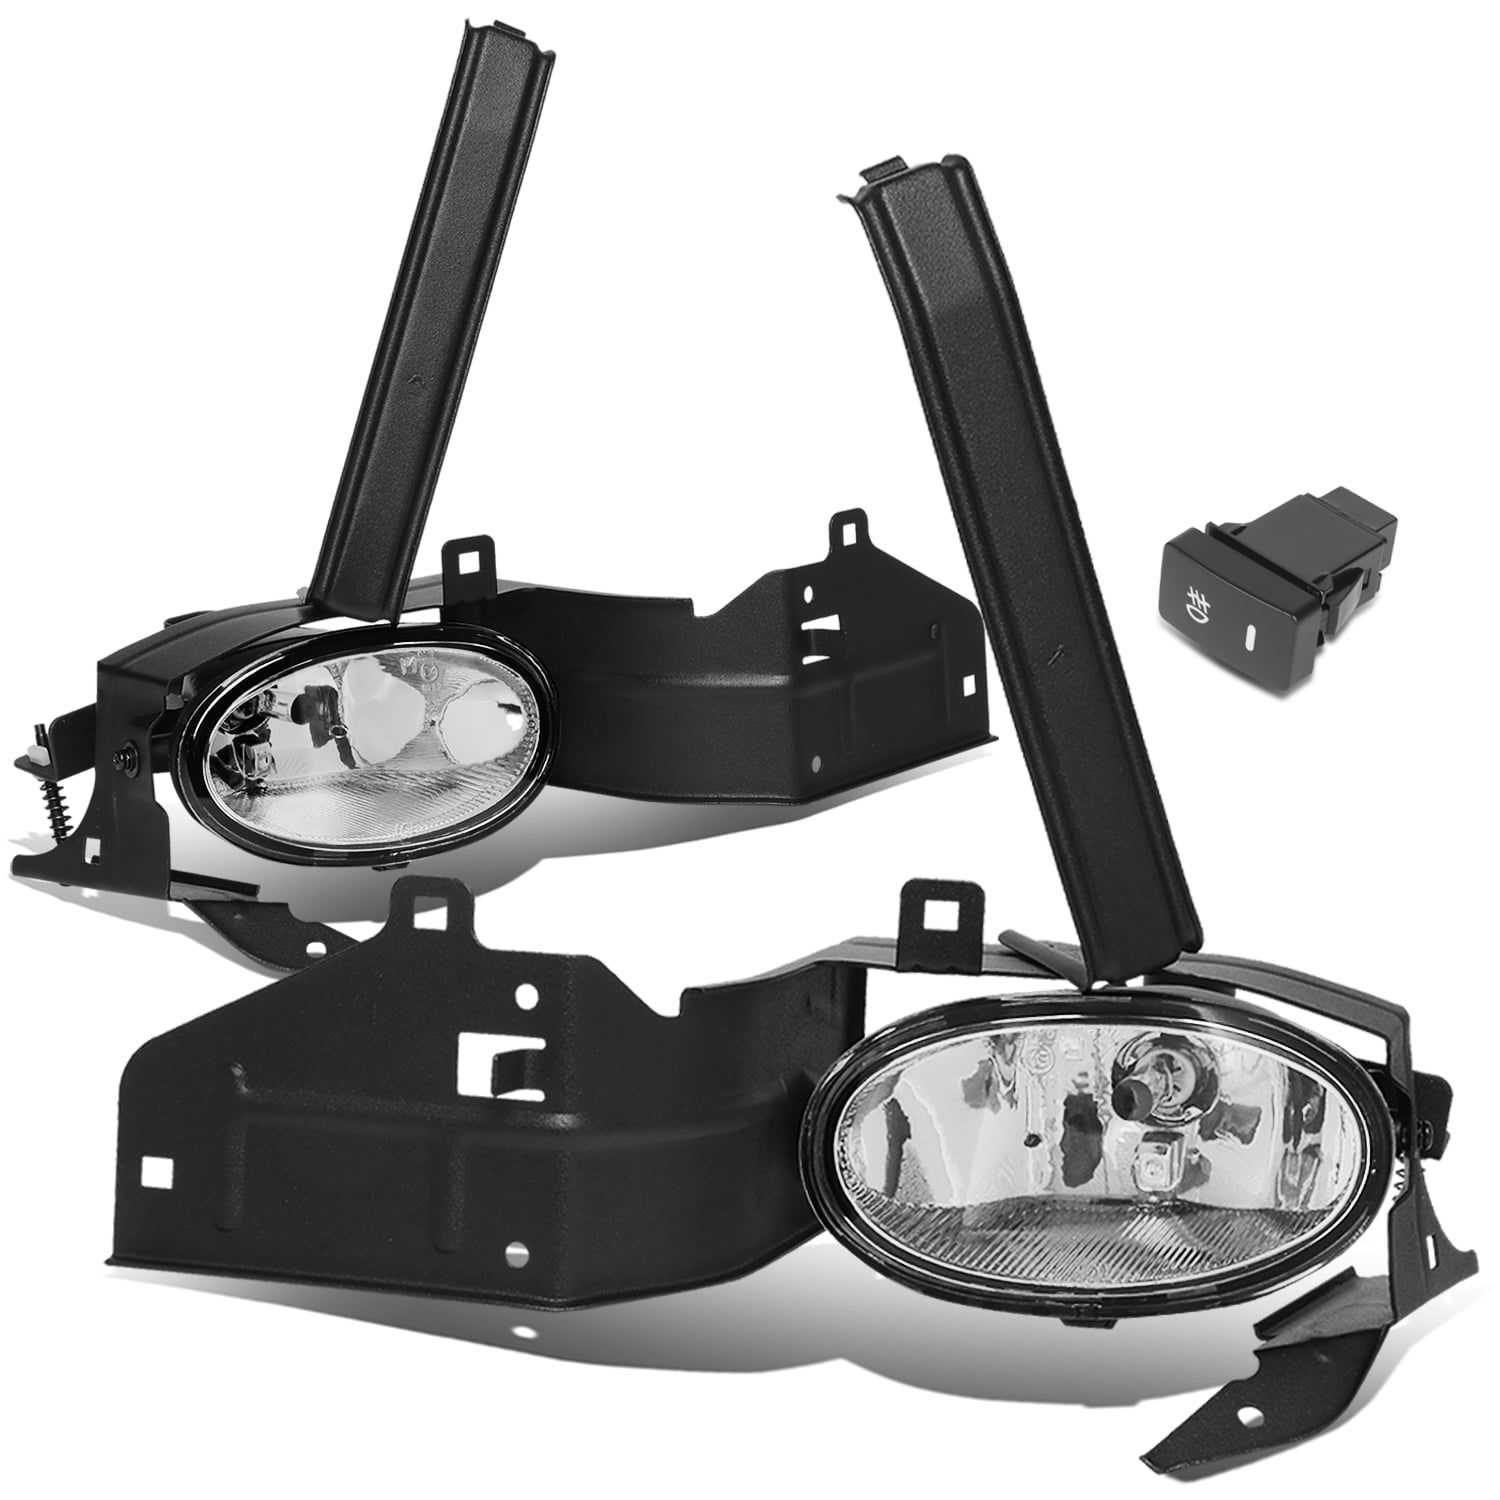 Details about   LOWER BUMPER CHROME FOG LIGHT+50W 8000K HID+SWITCH FOR 2008-2012 ALTIMA COUPE 2D